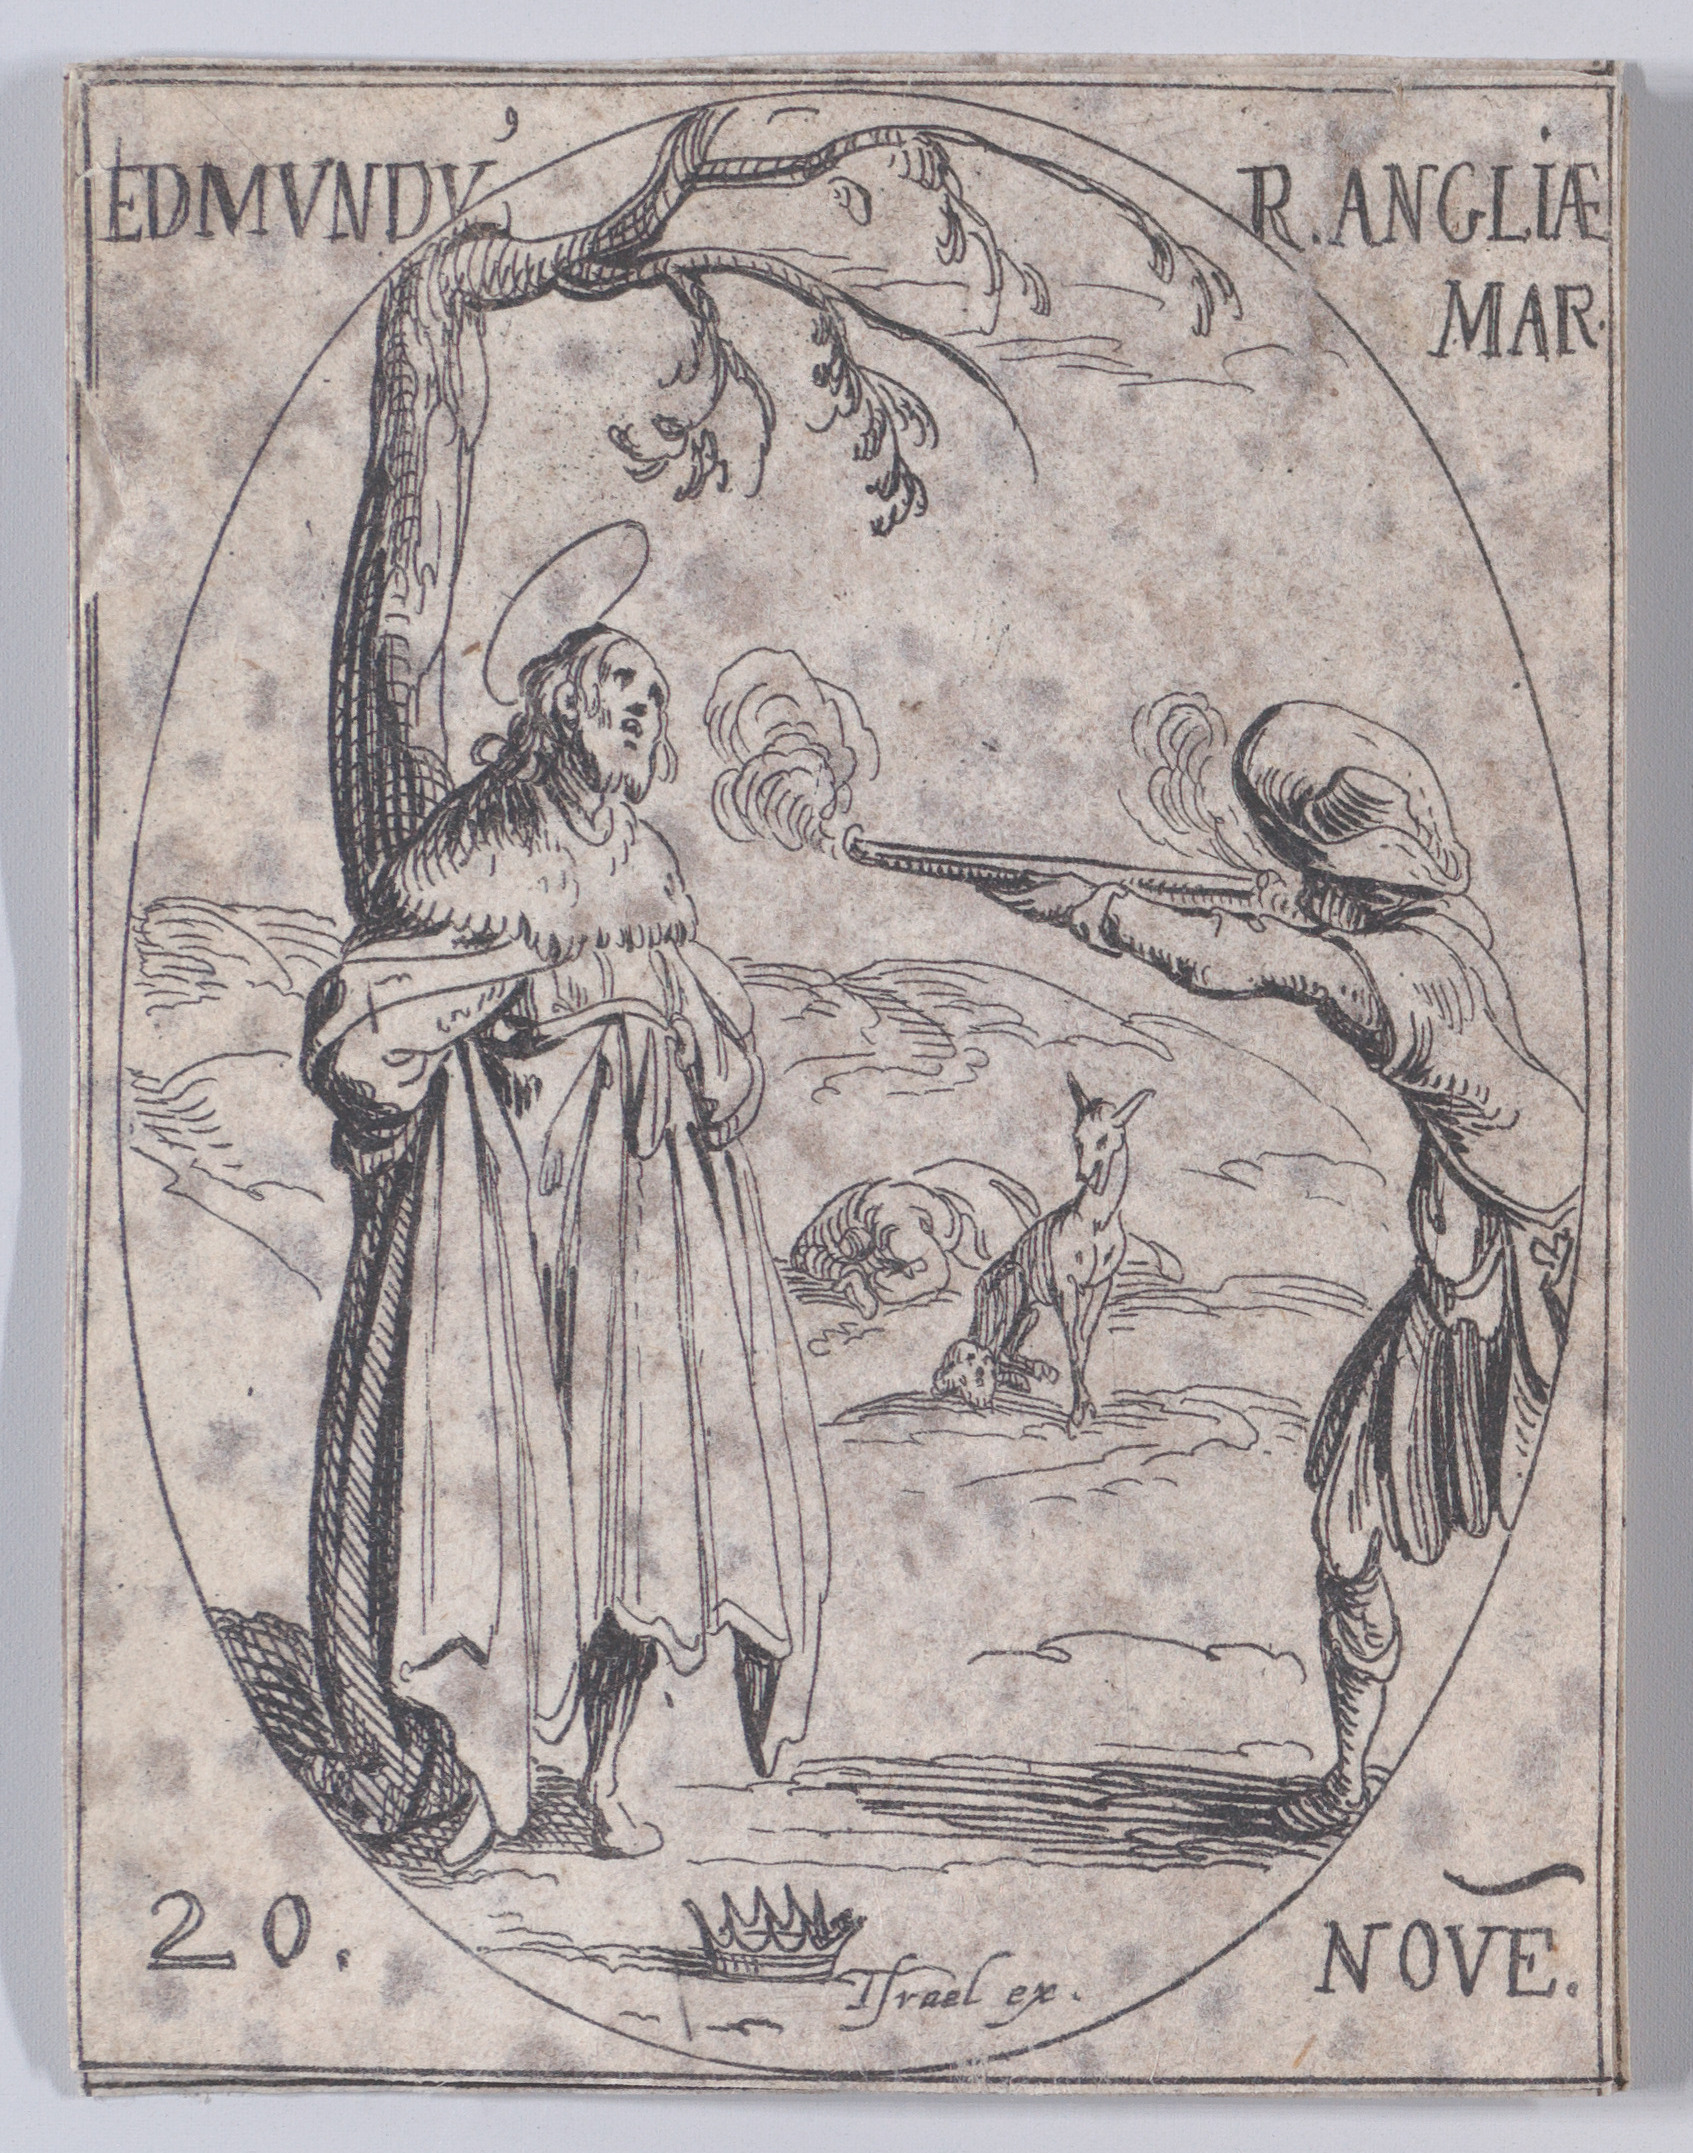 S. Edmund, Roi d'Angleterre, Martyr (St. Edmund, King of England, Martyr), November 20th, from Les Images De Tous Les Saincts et Saintes de L'Année (Images of All of the Saints and Religious Events of the Year), Jacques Callot (French, Nancy 1592–1635 Nancy), Etching; second state of two (Lieure)